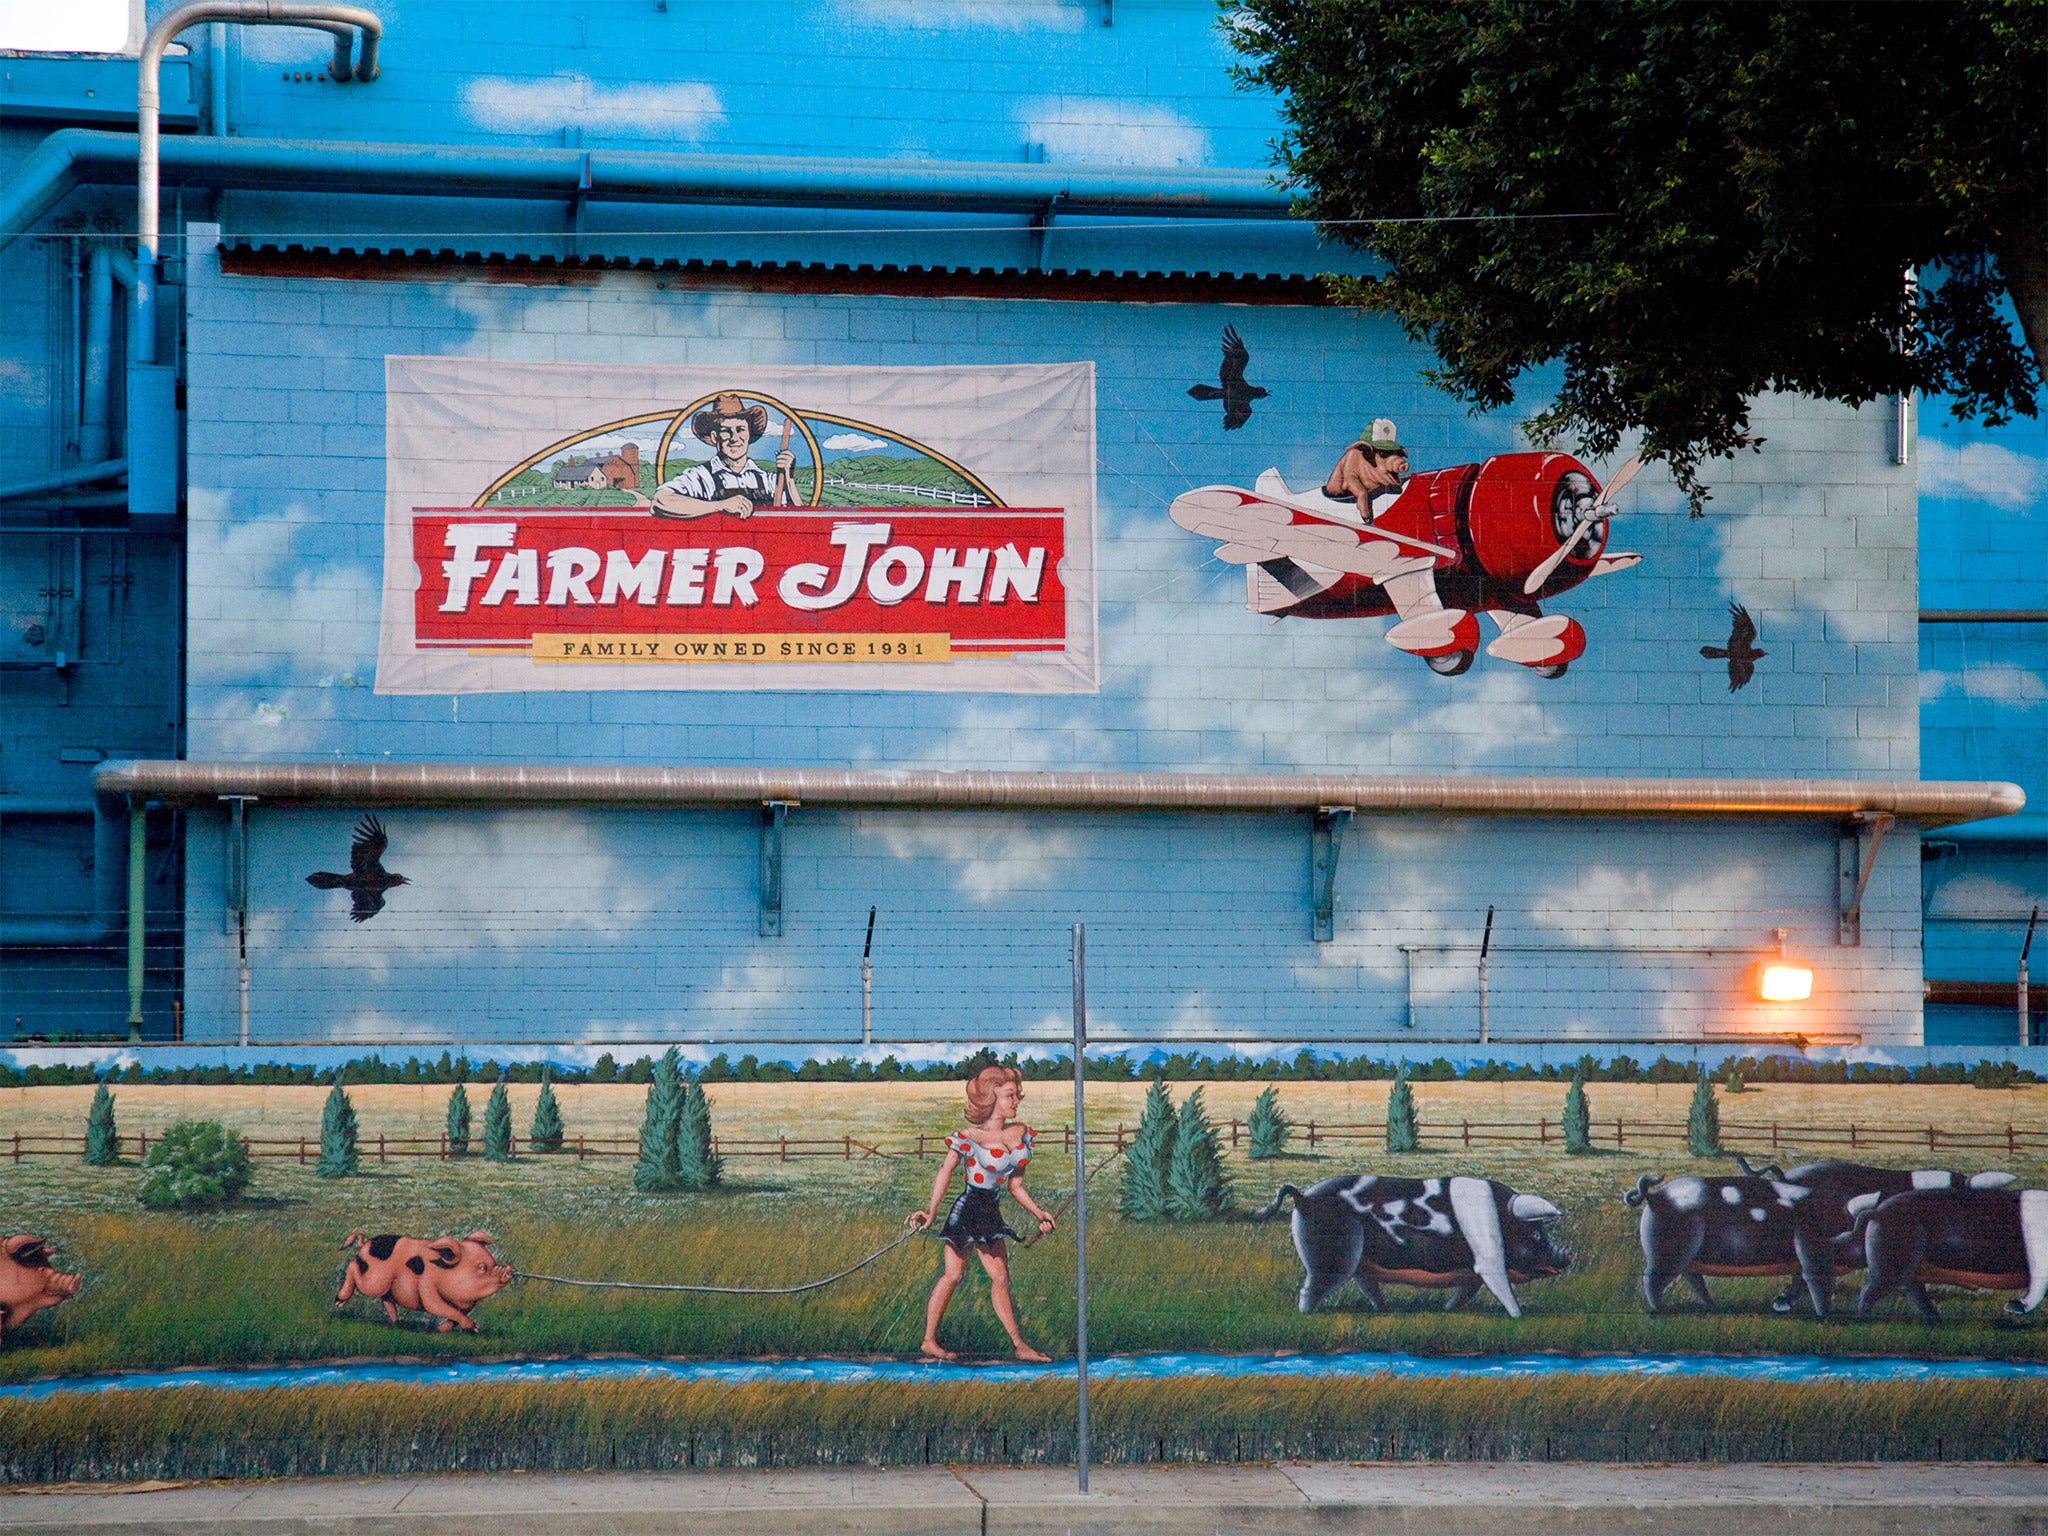 One of Vernon’s largest employers is the Farmer John meat processing plant